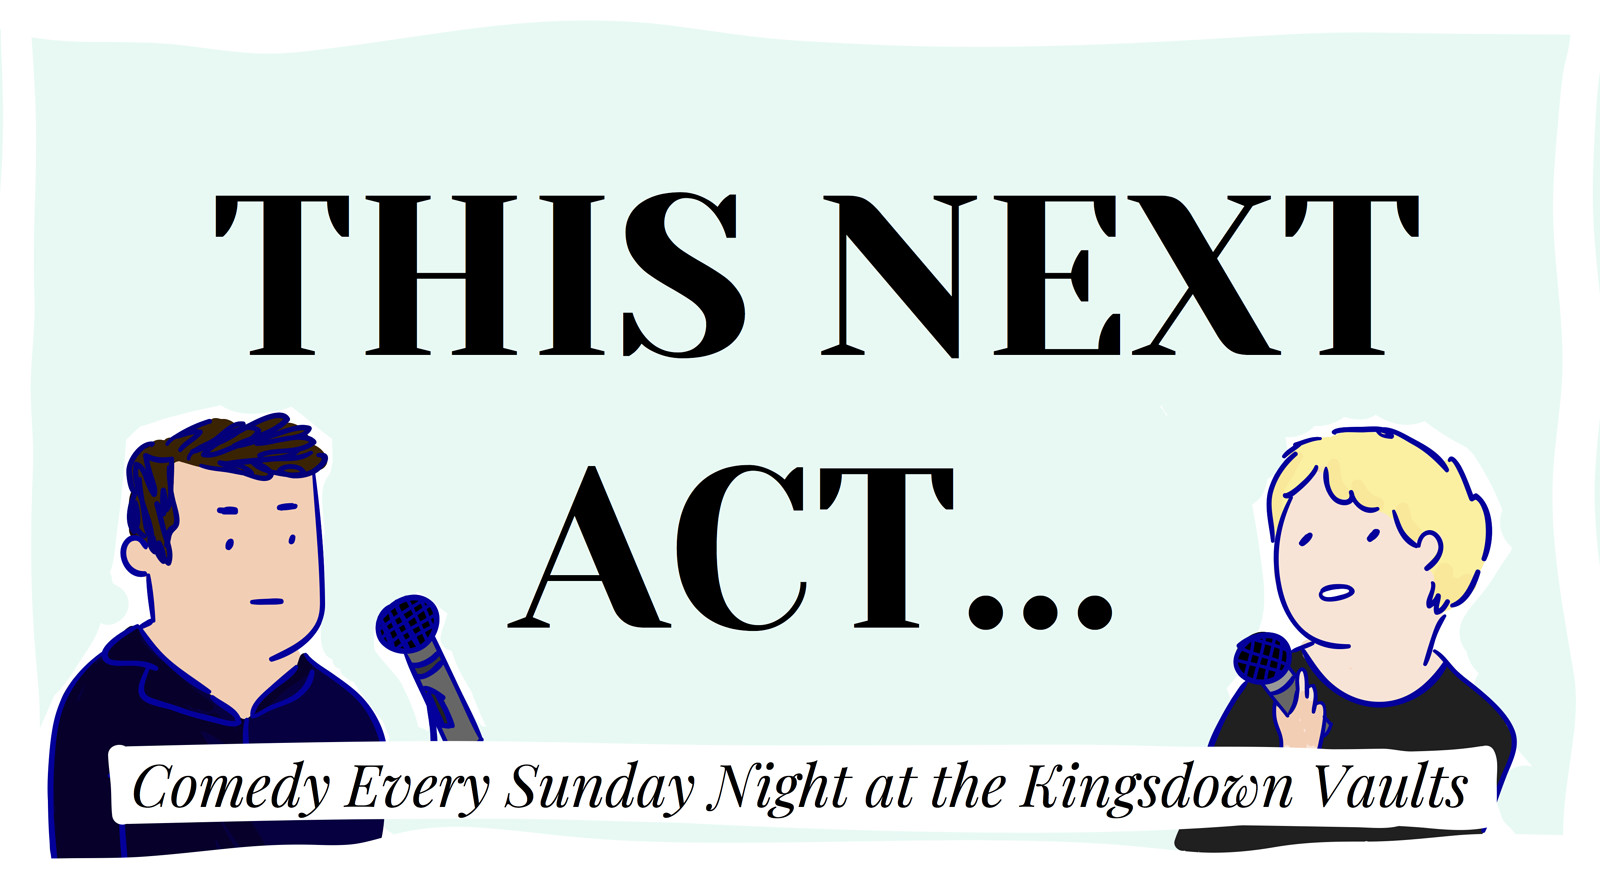 This Next Act Comedy Night at Kingsdown Vaults